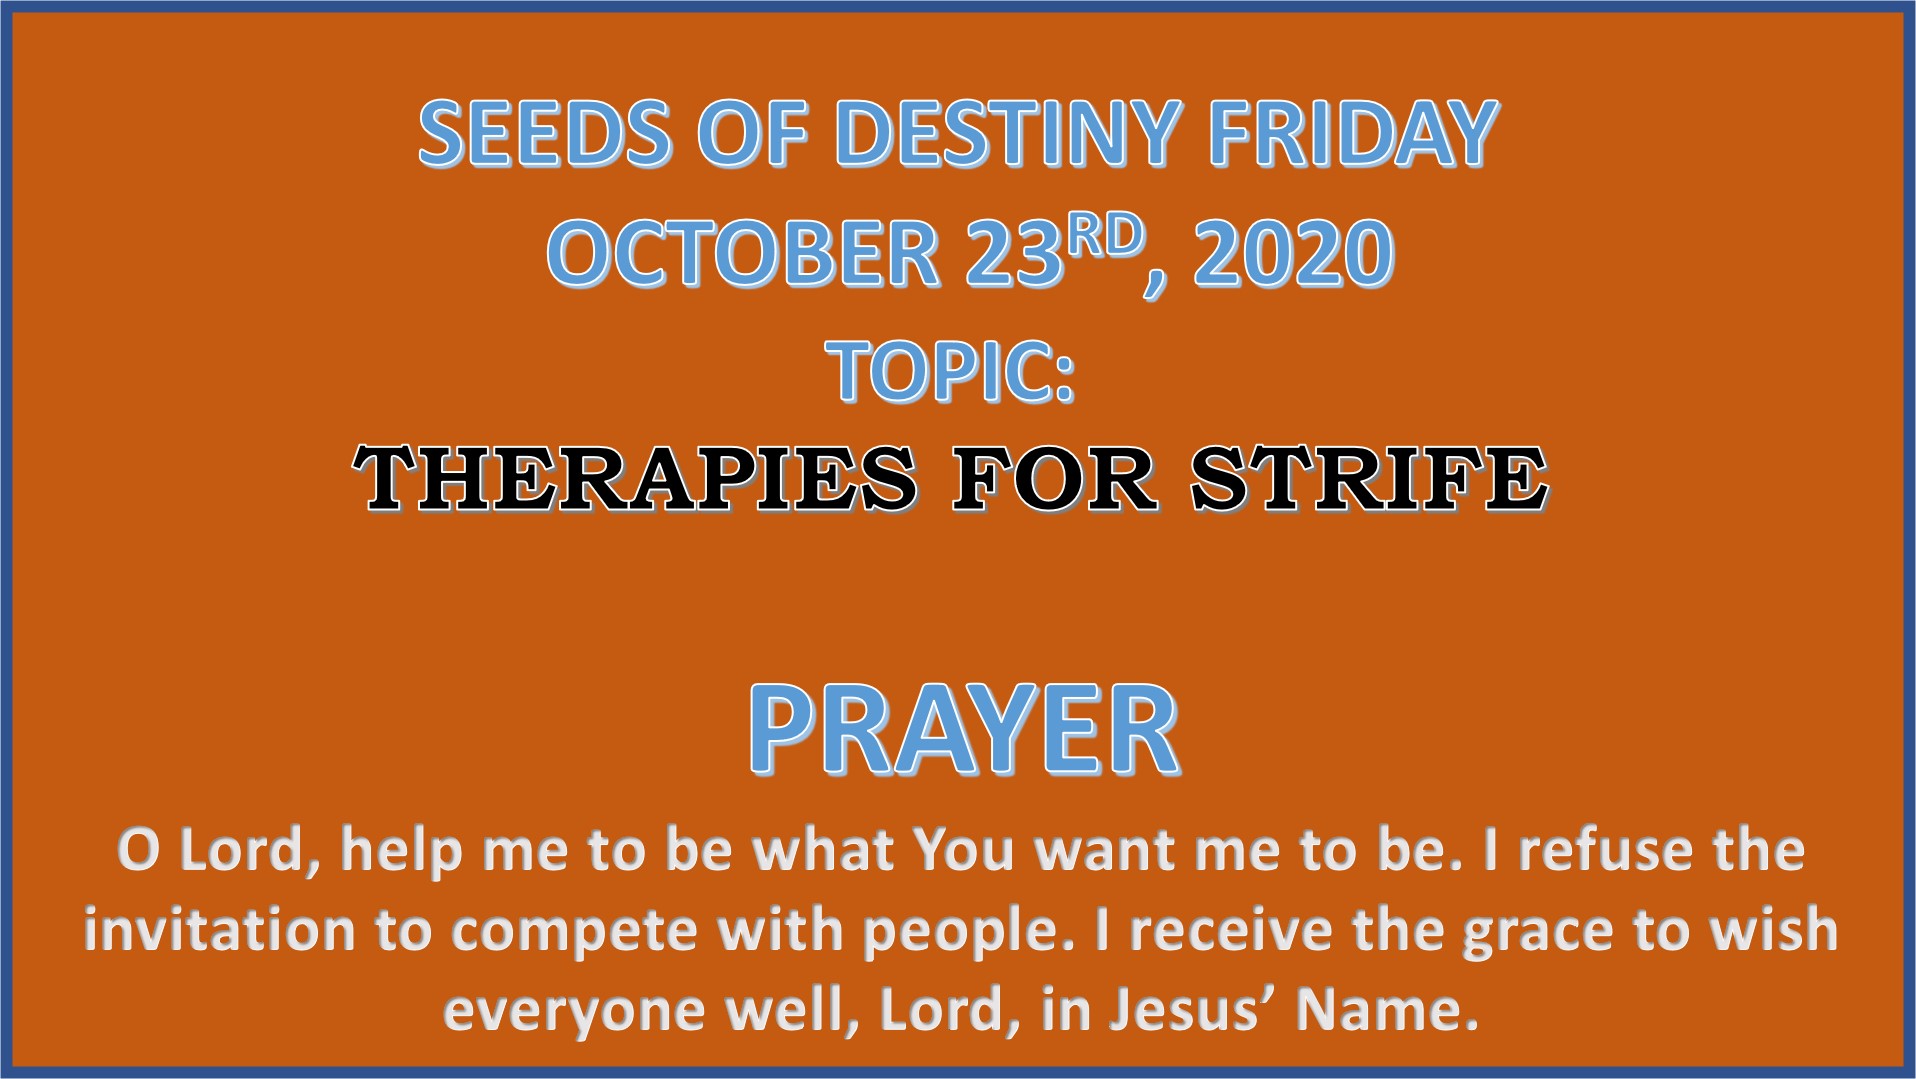 Seeds of Destiny Friday 23rd October 2020 by Dr Paul Enenche